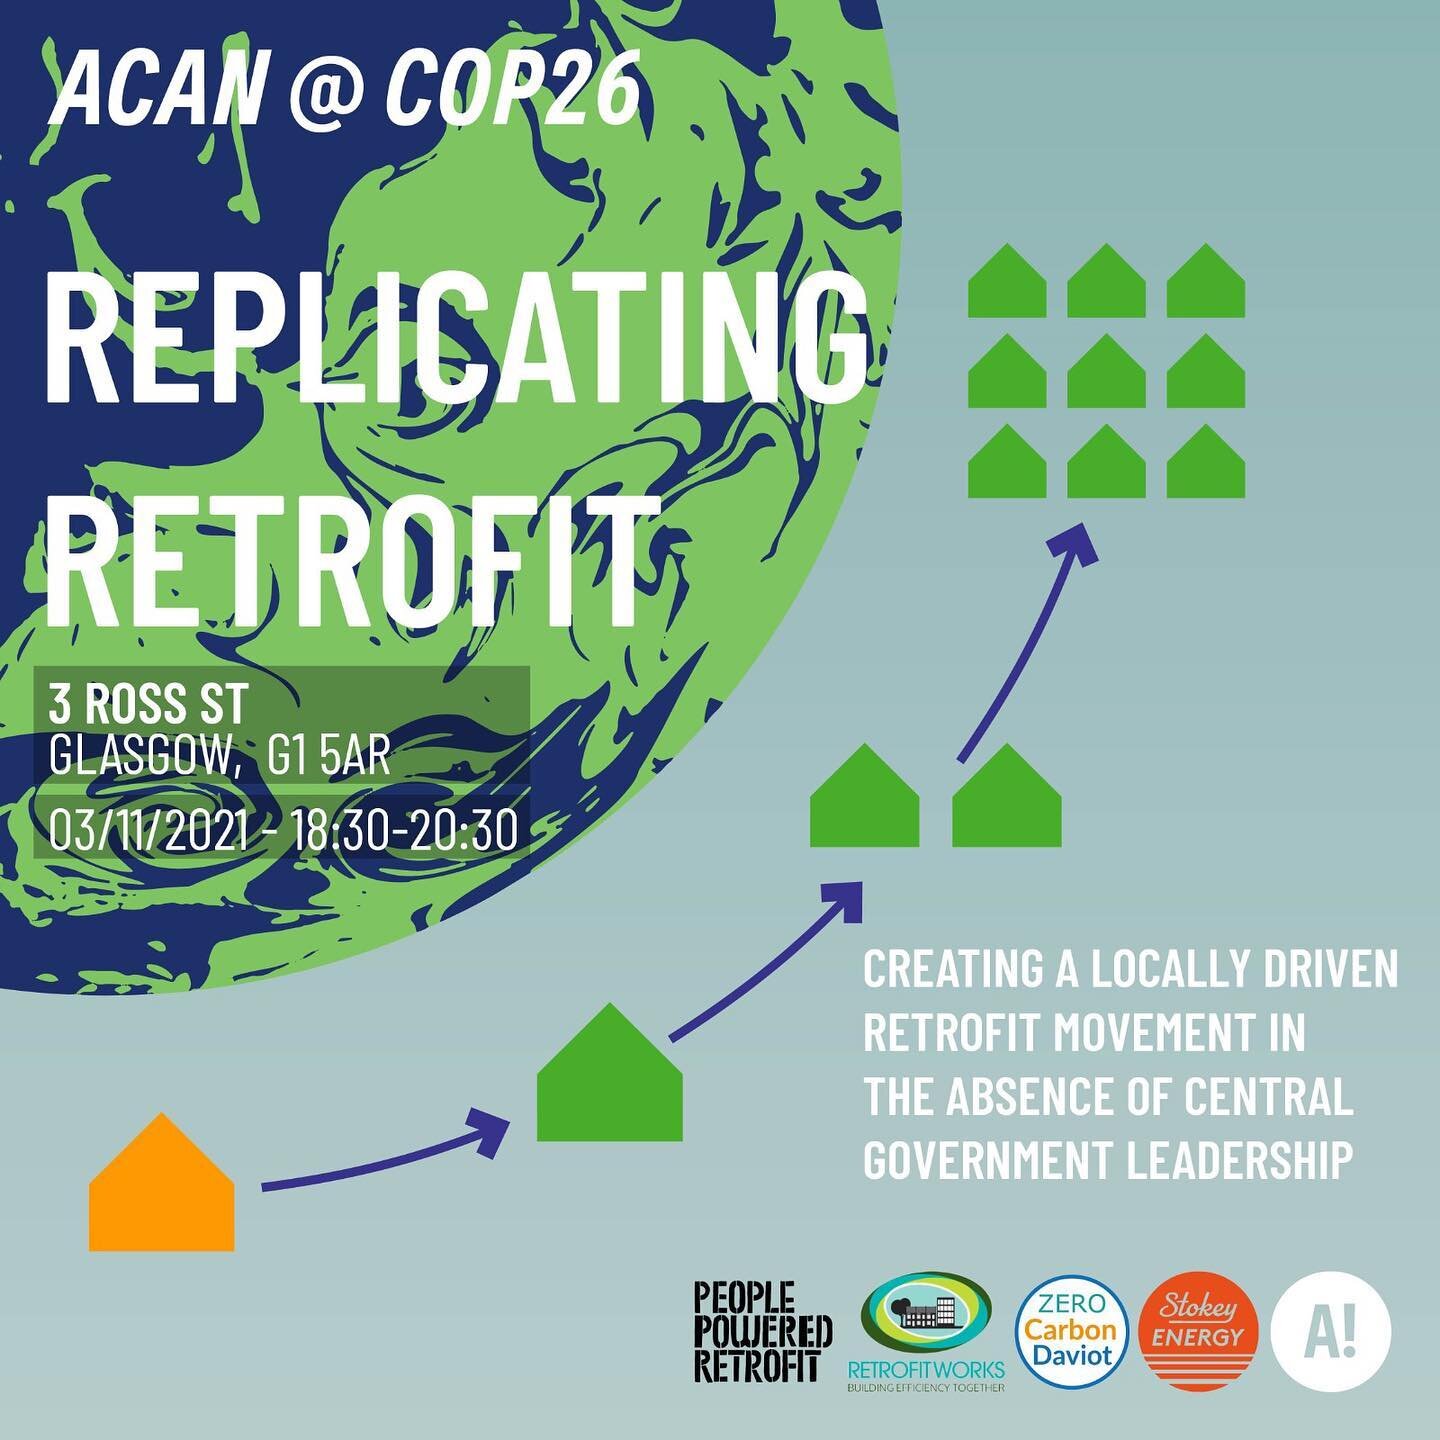 We&rsquo;re heading to Glasgow! Very excited to be talking all things retrofit with @peopleretrofit @retrofitworks as part of this @architectscan event at @manystudios sponsored by the @ecologybs 
Come and say hi if you&rsquo;re in town!
.
#COP26 #st